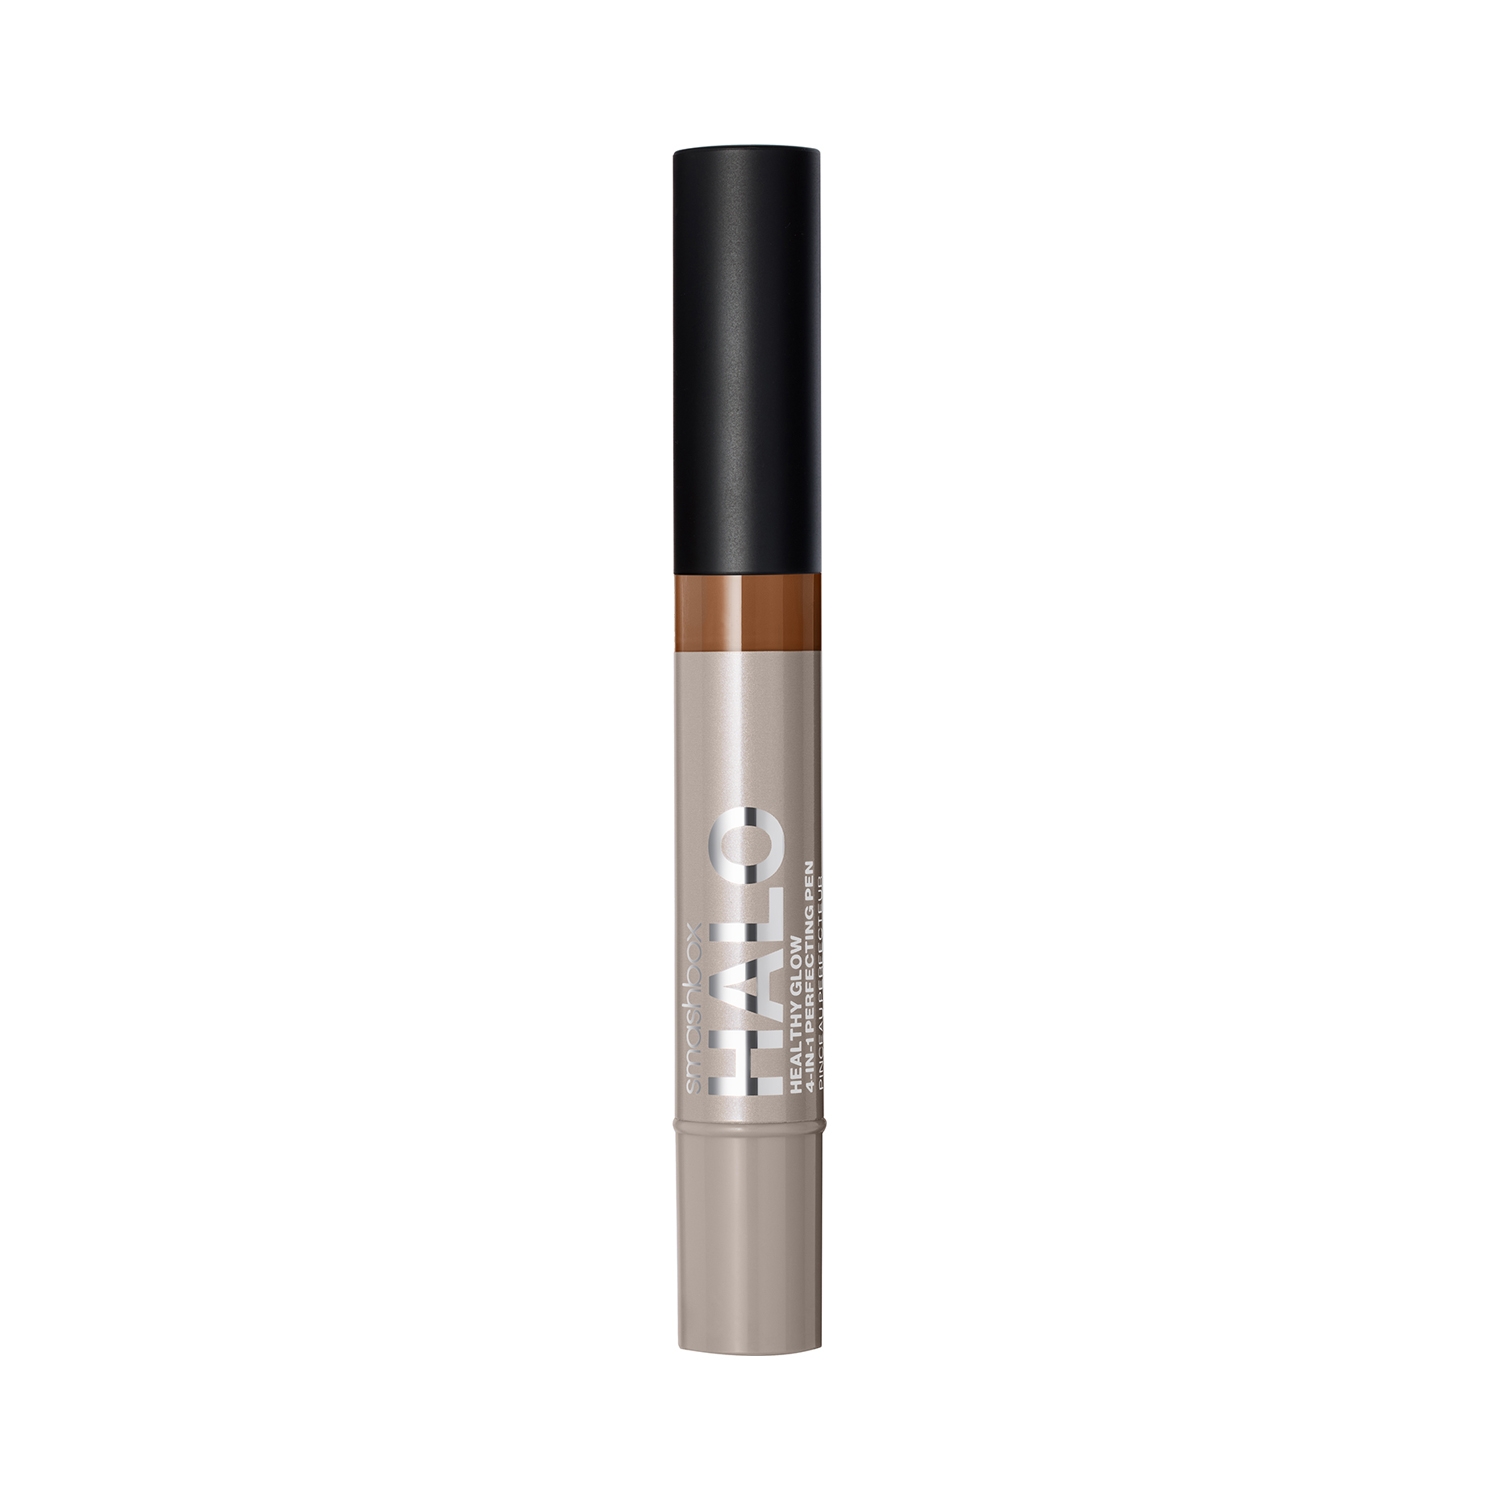 Smashbox | Smashbox Halo Healthy Glow 4-In-1 Perfecting Concealer Pen - T10N (3.5ml)